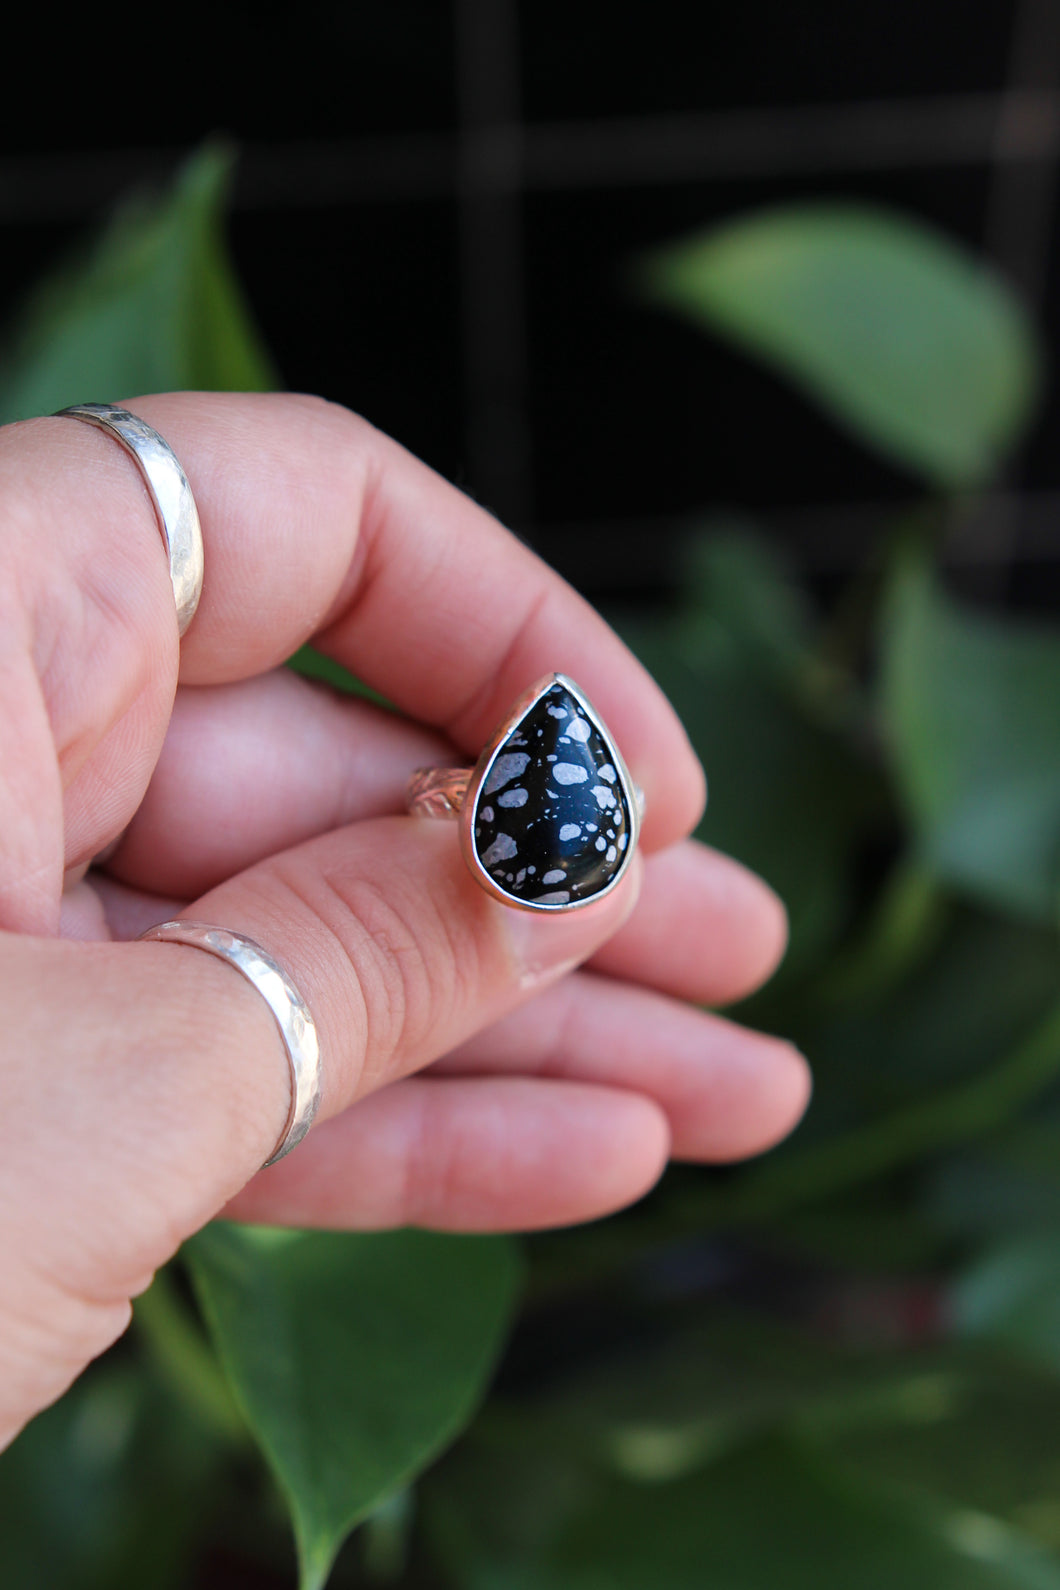 Snowflake Obsidian Sterling Silver Ring Size 5.75 | Brandi’s Collection